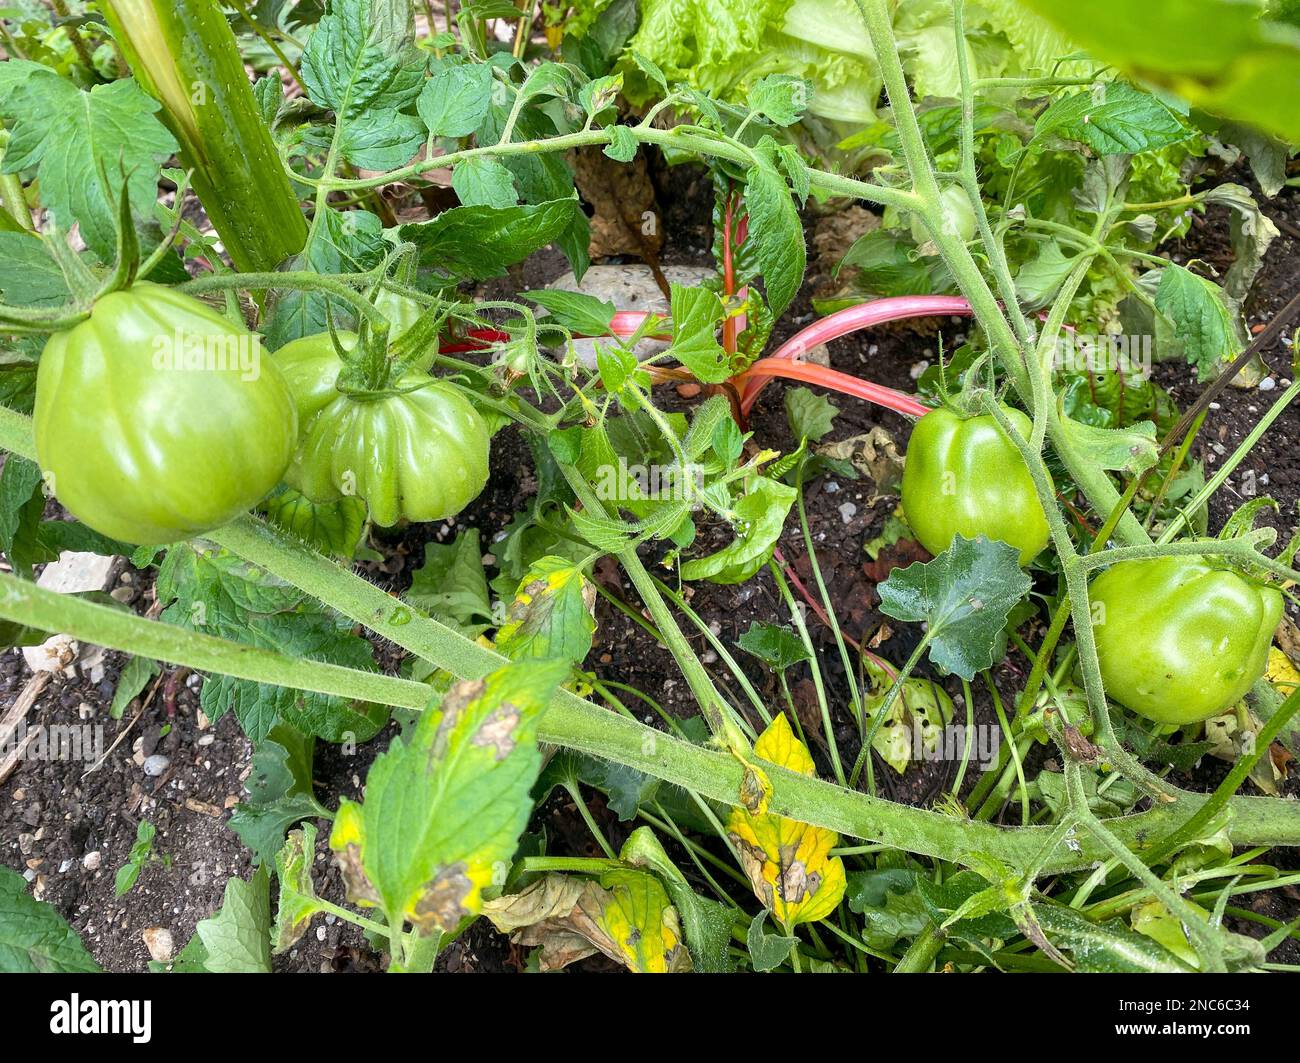 Urban gardening in the city on balcony or terrace with vegetables: tomato, salad, radish, carrot and chard. Vegan nutrition and healthy food for a Sus Stock Photo